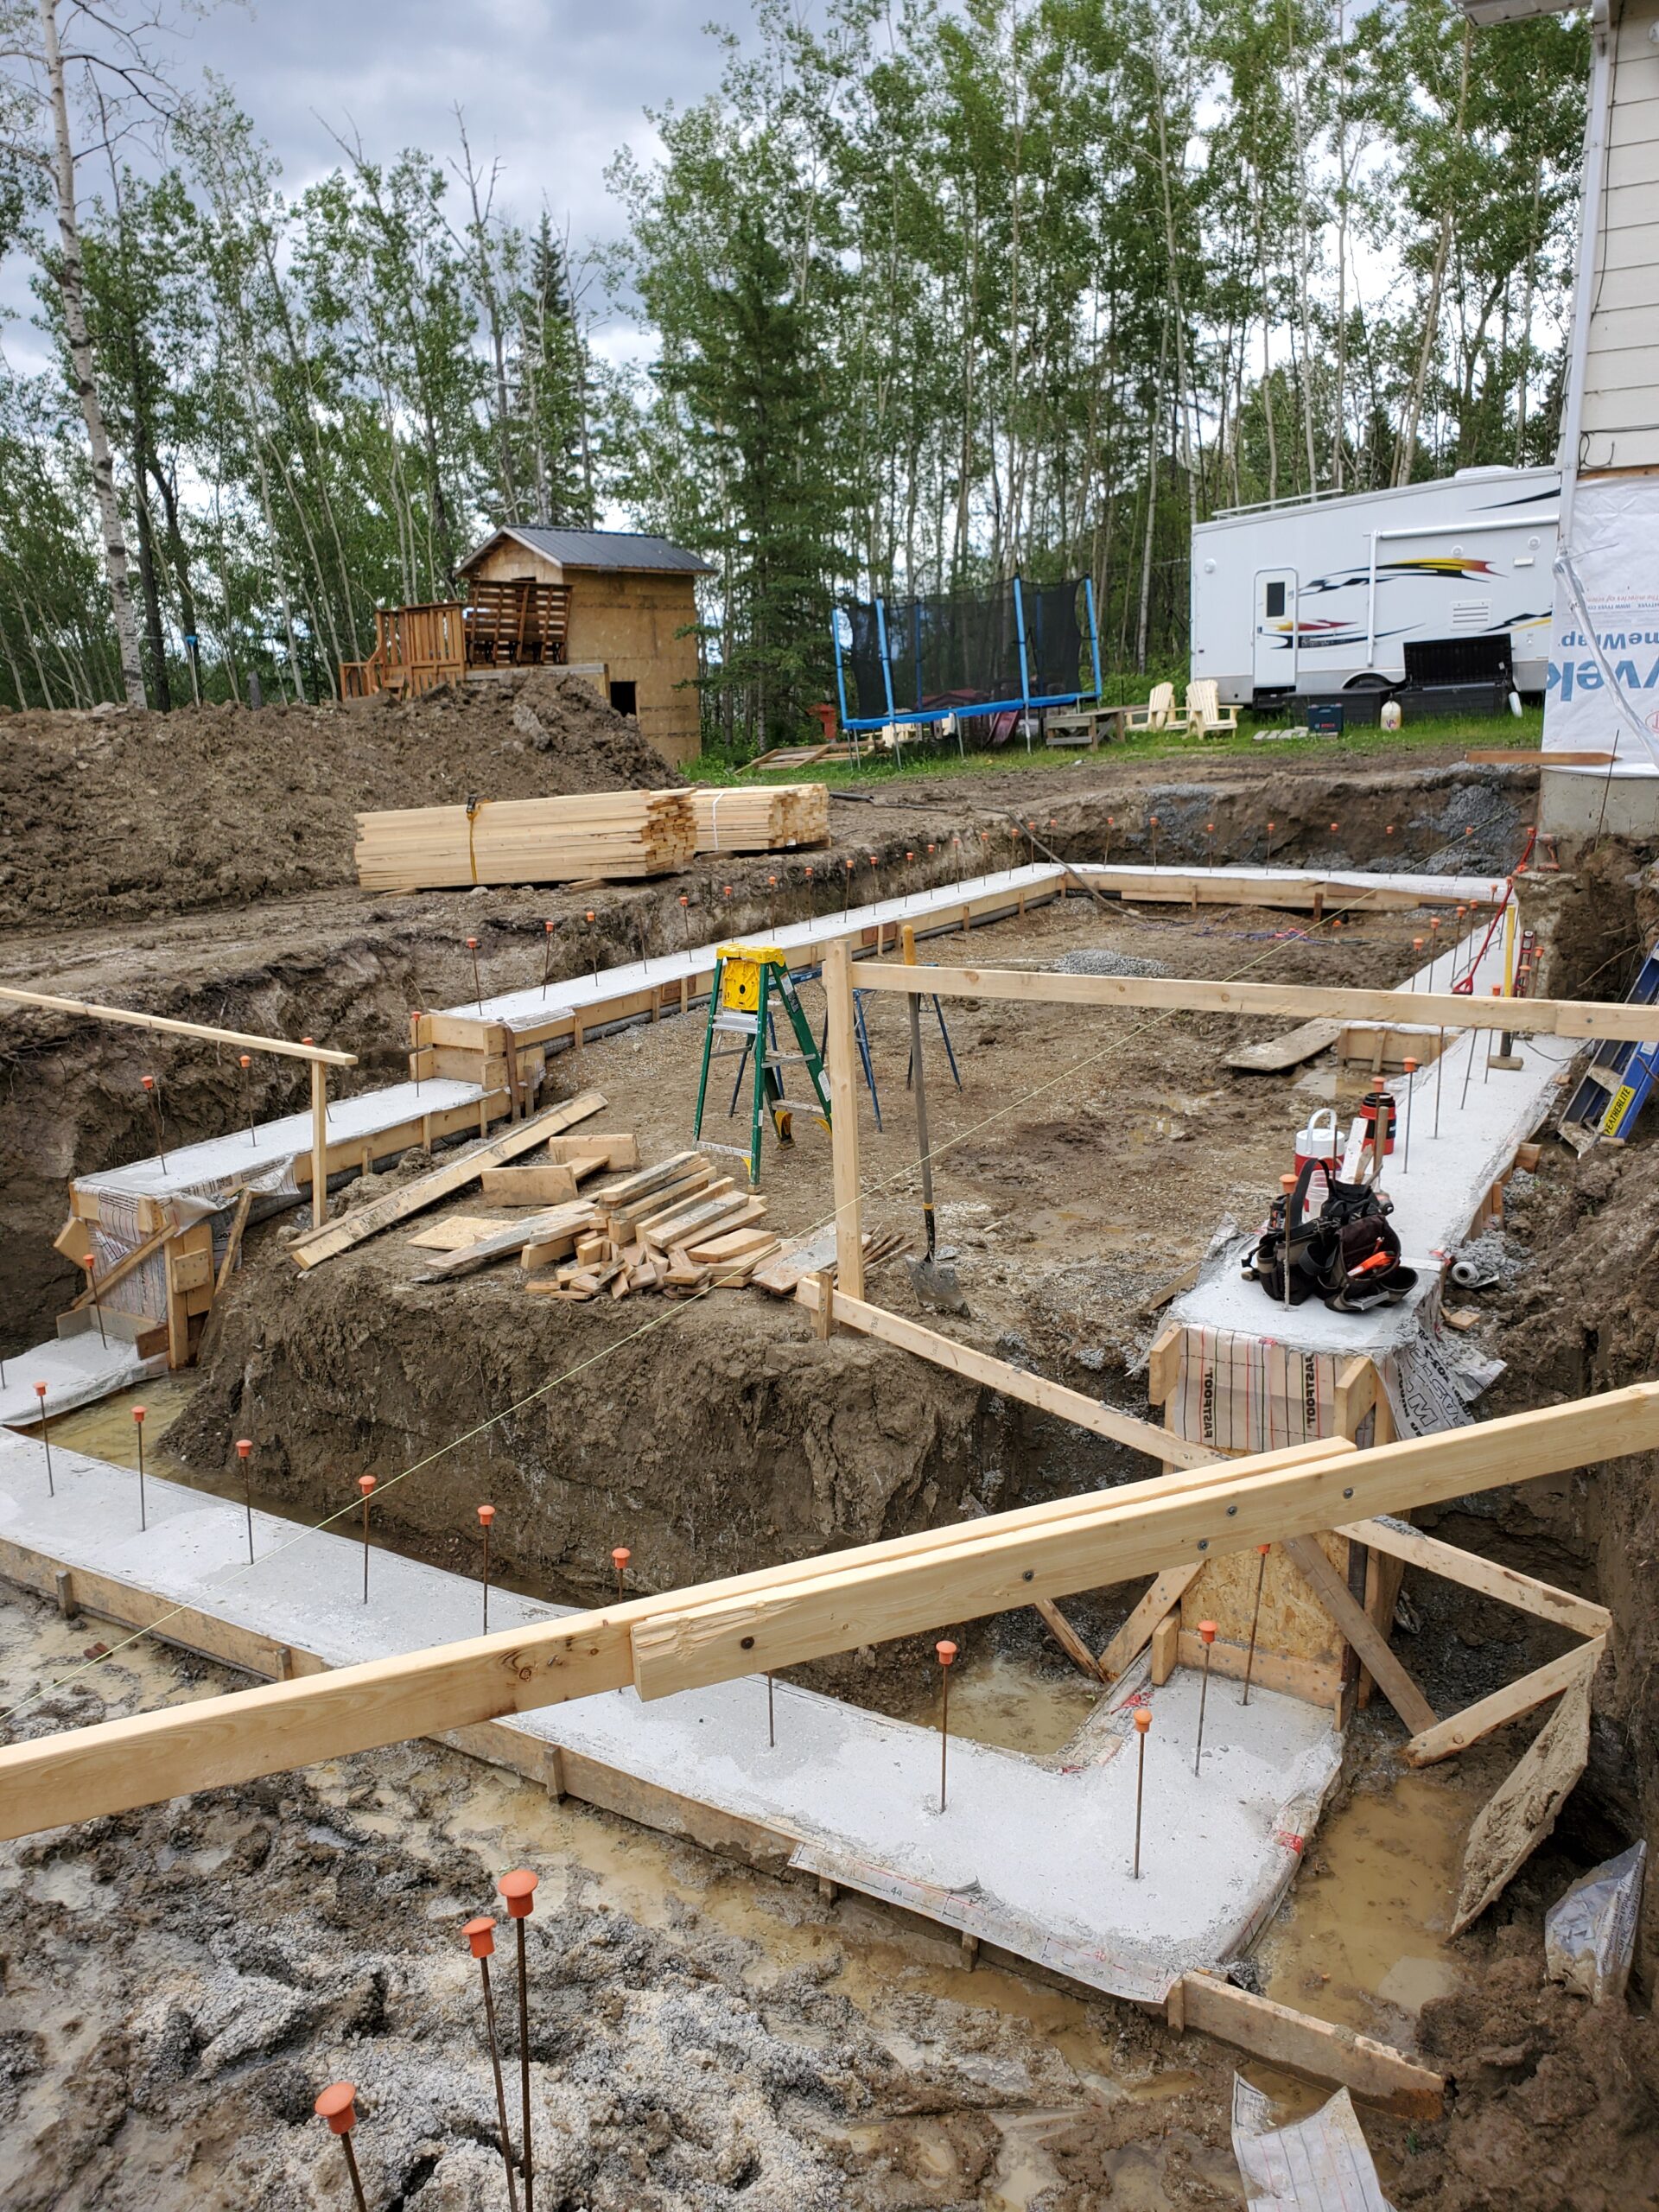 A step footing in progress for an Advantage ICF walk-out basement addition. The image illustrates the construction site, showcasing the carefully laid foundation using Insulated Concrete Forms. The stepped footing design is evident, highlighting the initial stages of the walk-out basement construction with Advantage ICF blocks.